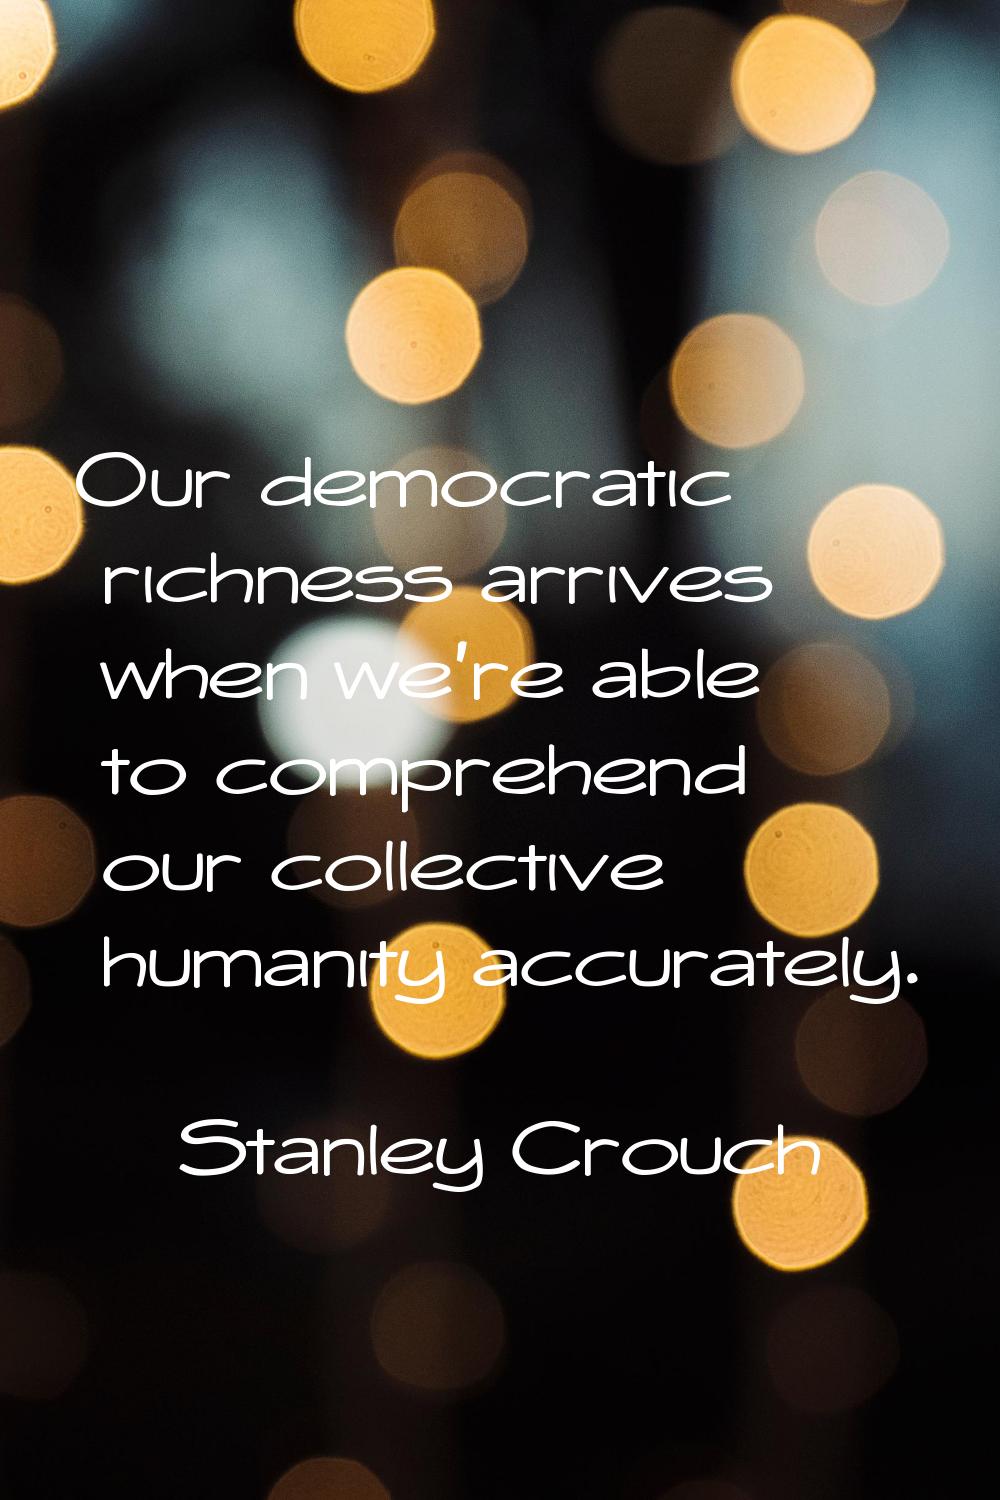 Our democratic richness arrives when we're able to comprehend our collective humanity accurately.